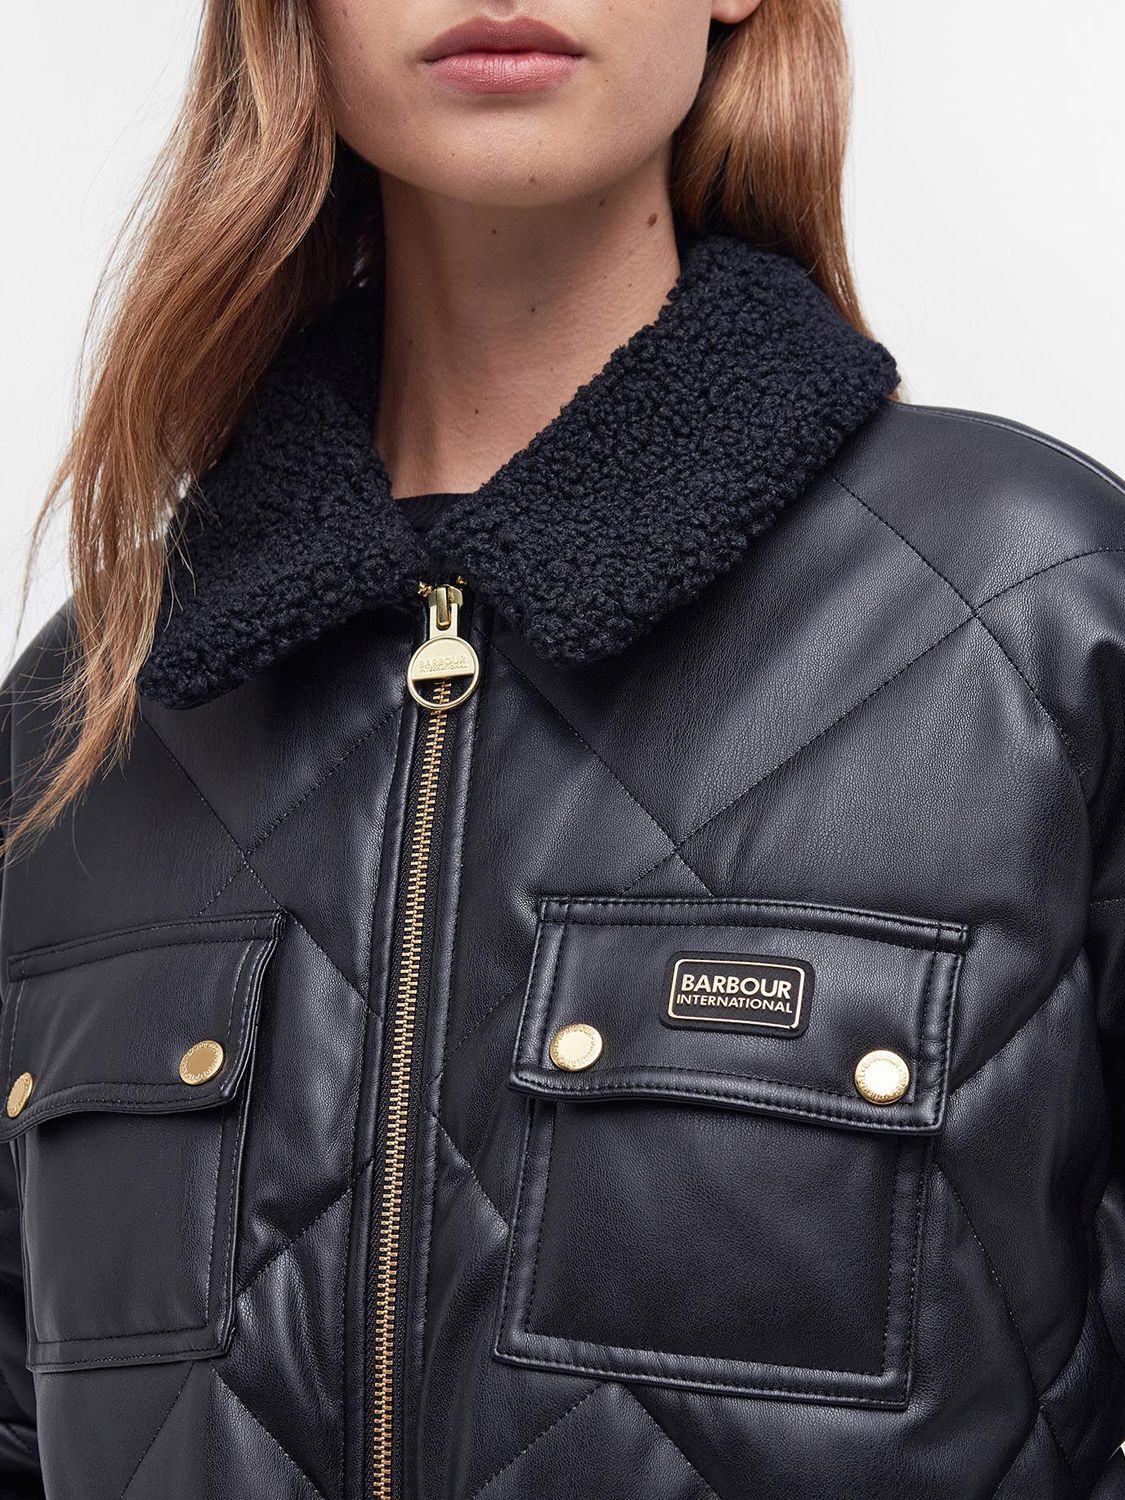 Buy Barbour International Neutron Faux Leather Quilted Jacket, Black Online at johnlewis.com